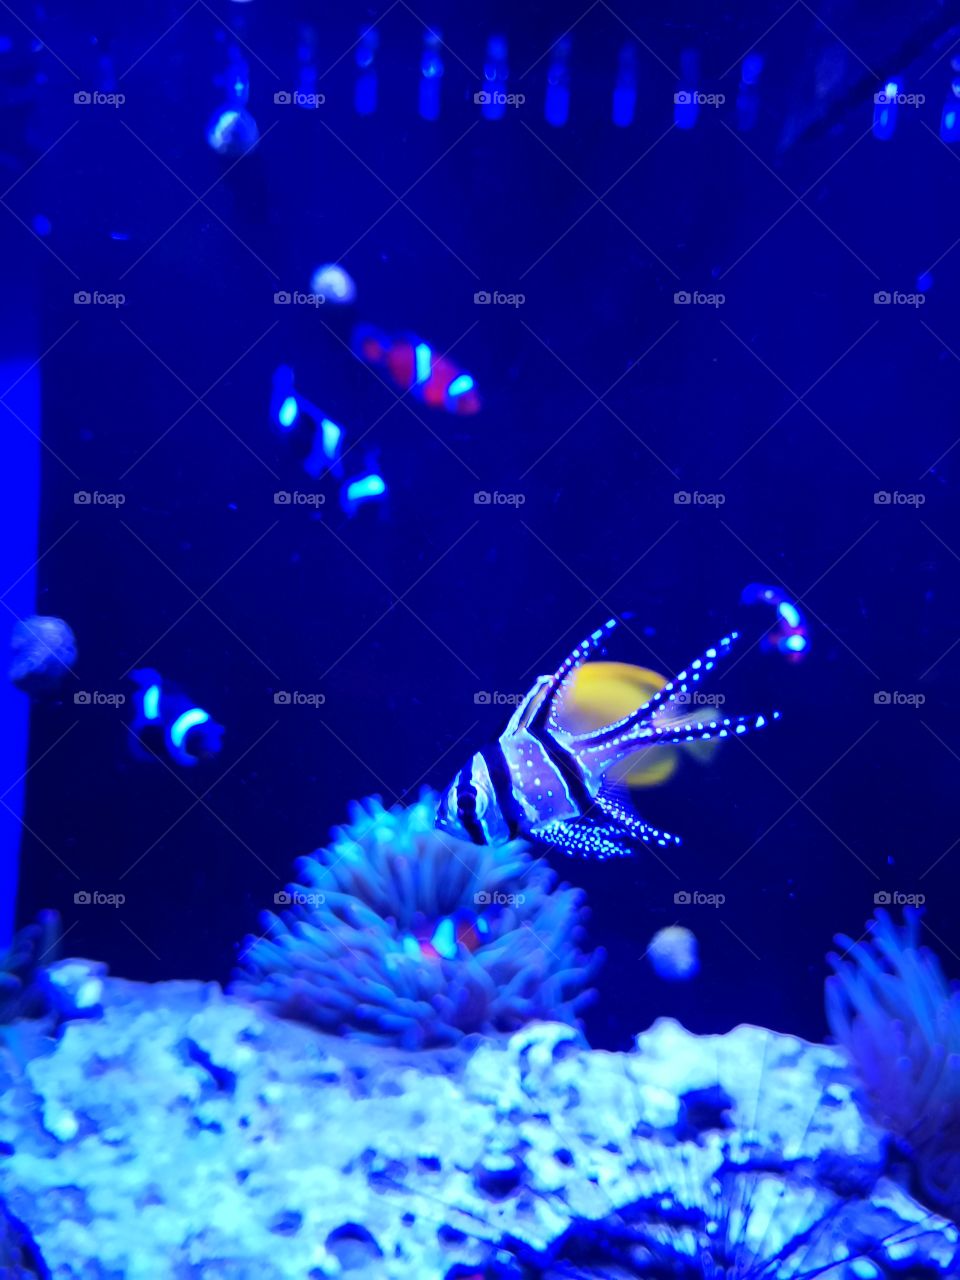 I believe this is called an angel fish